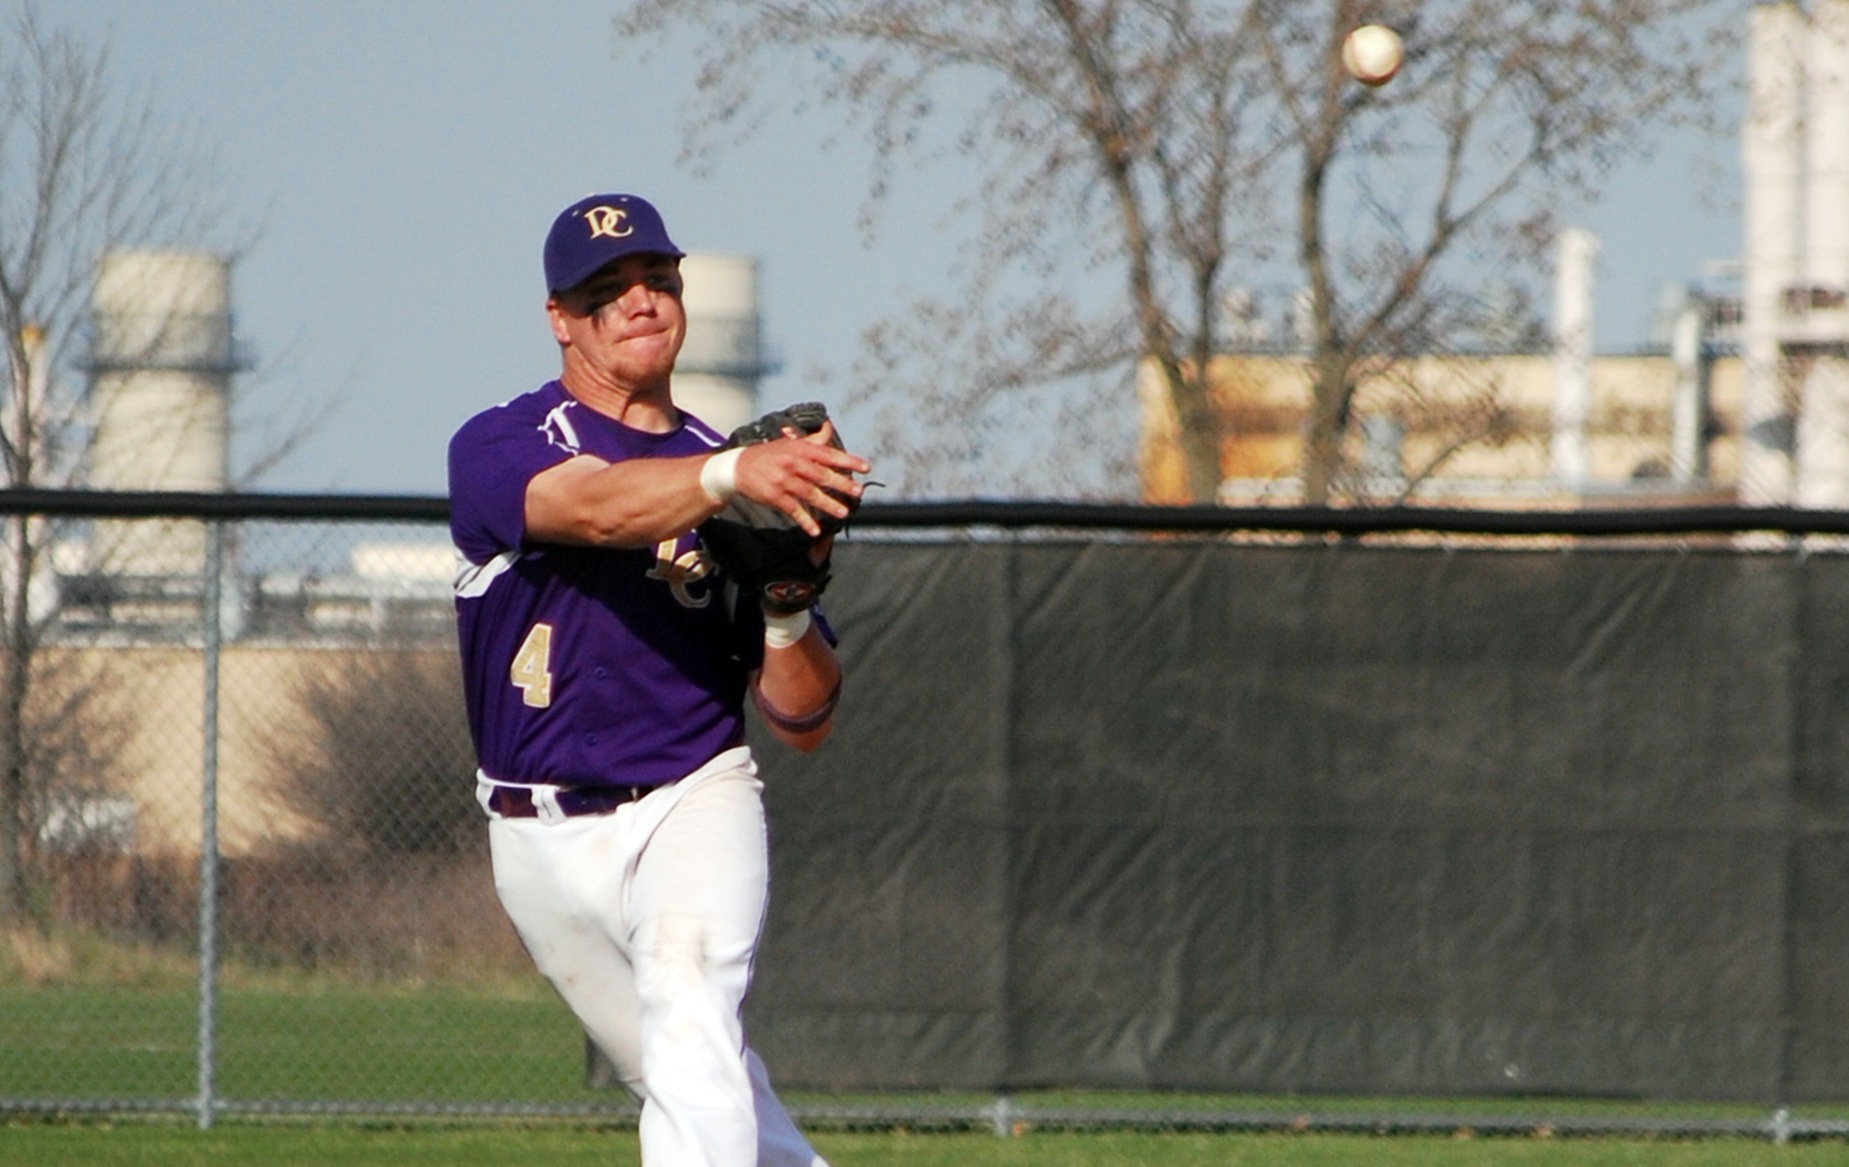 Bluffton Rallies for 10-9 Win Over Jackets